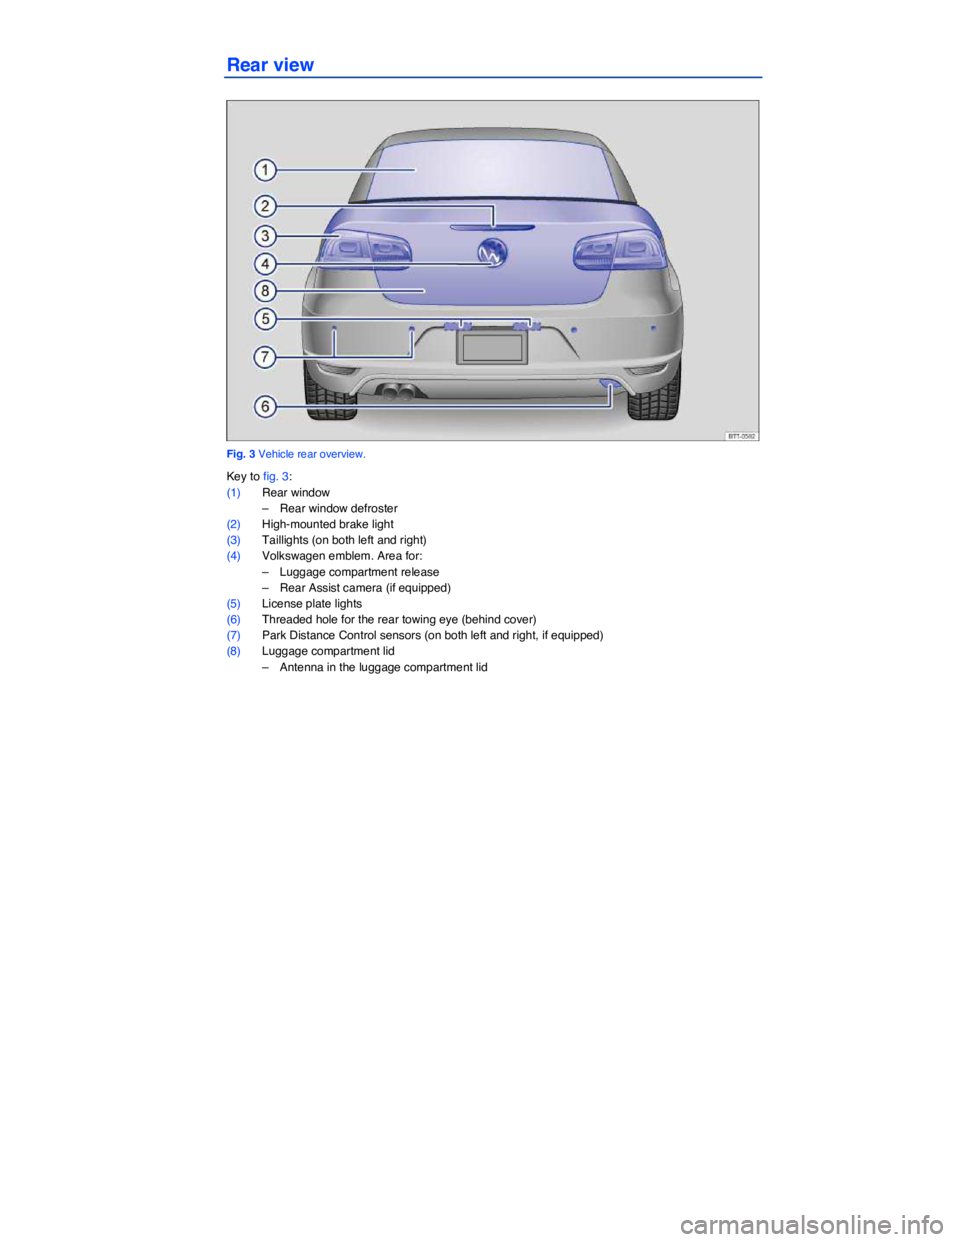 VOLKSWAGEN EOS 2006  Owners Manual  
 
Rear view 
 
Fig. 3 Vehicle rear overview. 
Key to fig. 3: 
(1) Rear window 
–  Rear window defroster  
(2) High-mounted brake light 
(3) Taillights (on both left and right)  
(4) Volkswagen emb